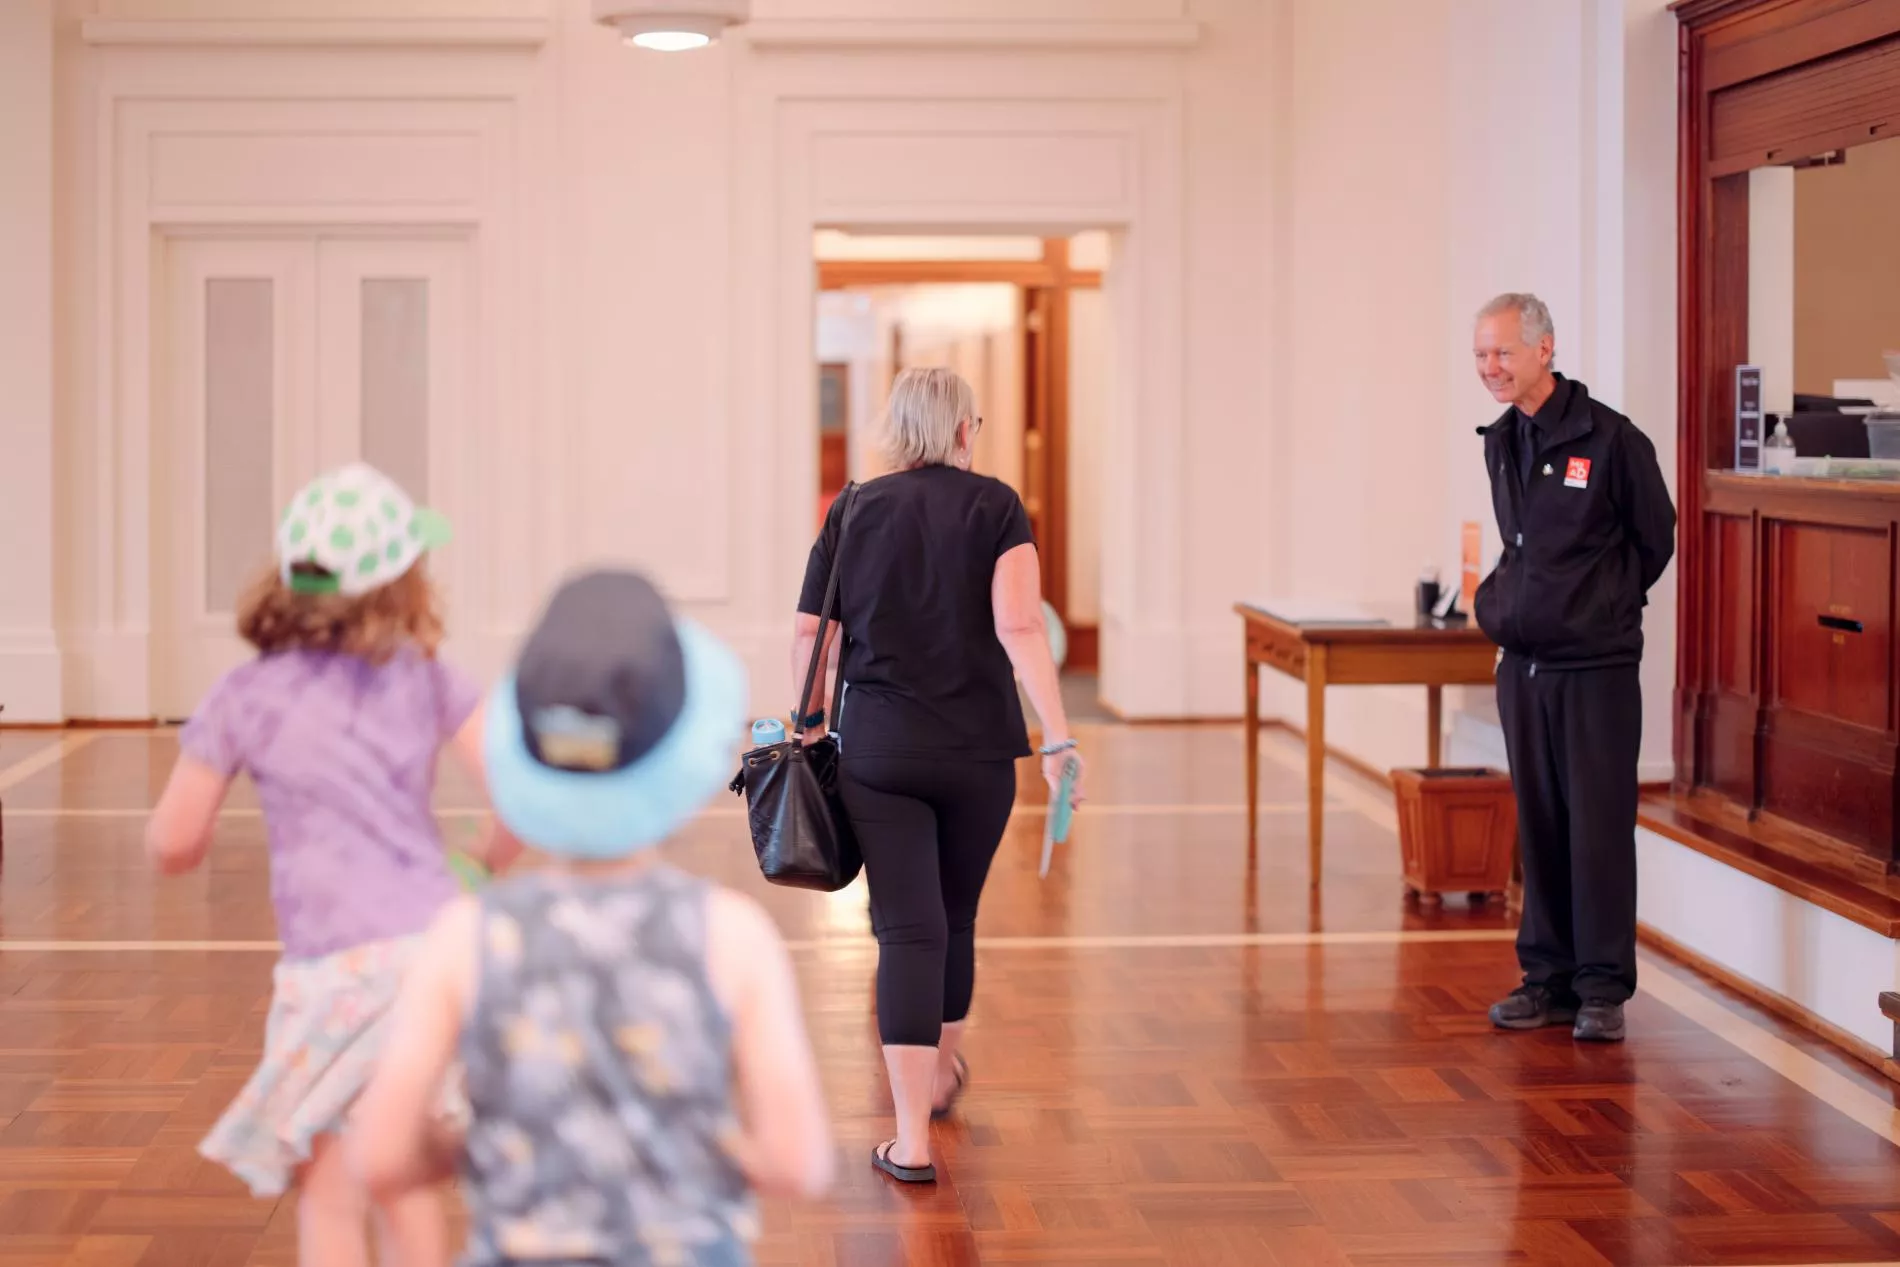 A woman and two children walk towards a museum experience officer dressed in a black uniform with a MoAD badge.